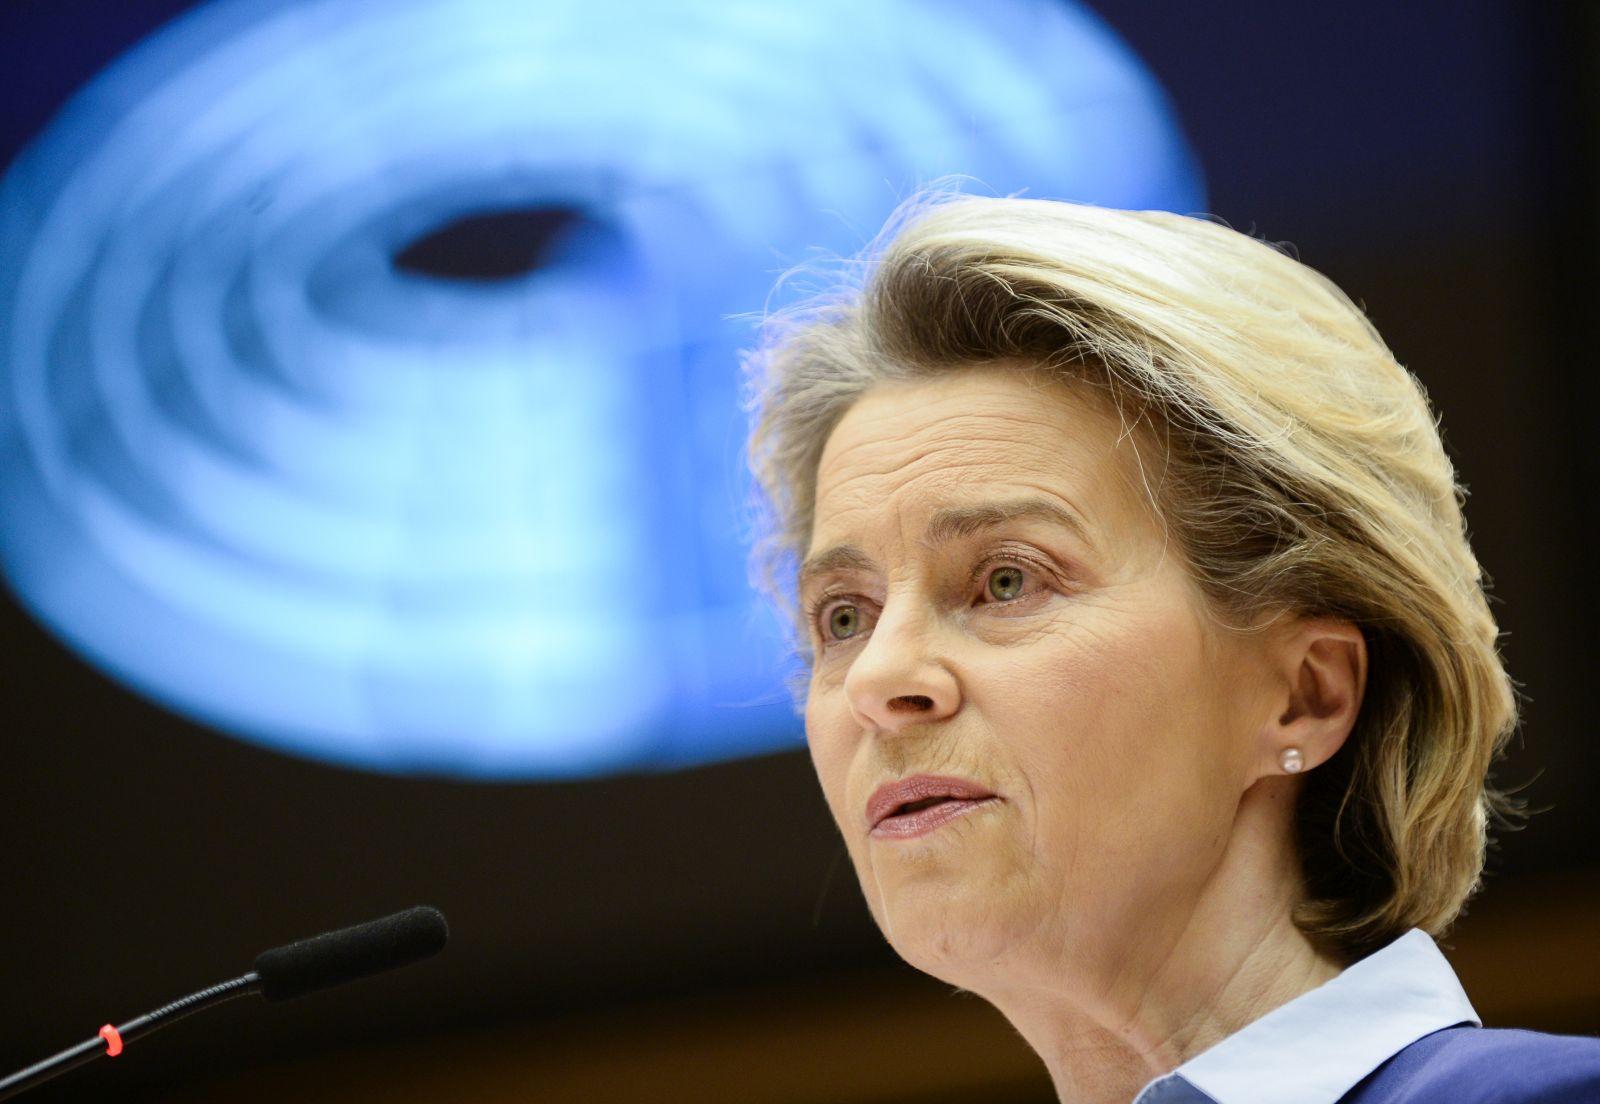 epa09000550 European Commission President Ursula von der Leyen speaks during the debate on the state of play of the EU's coronavirus disease (COVID-19) vaccination strategy, at the European Parliament in Brussels, Belgium, 10 February 2021.  EPA/JOHANNA GERON / POOL